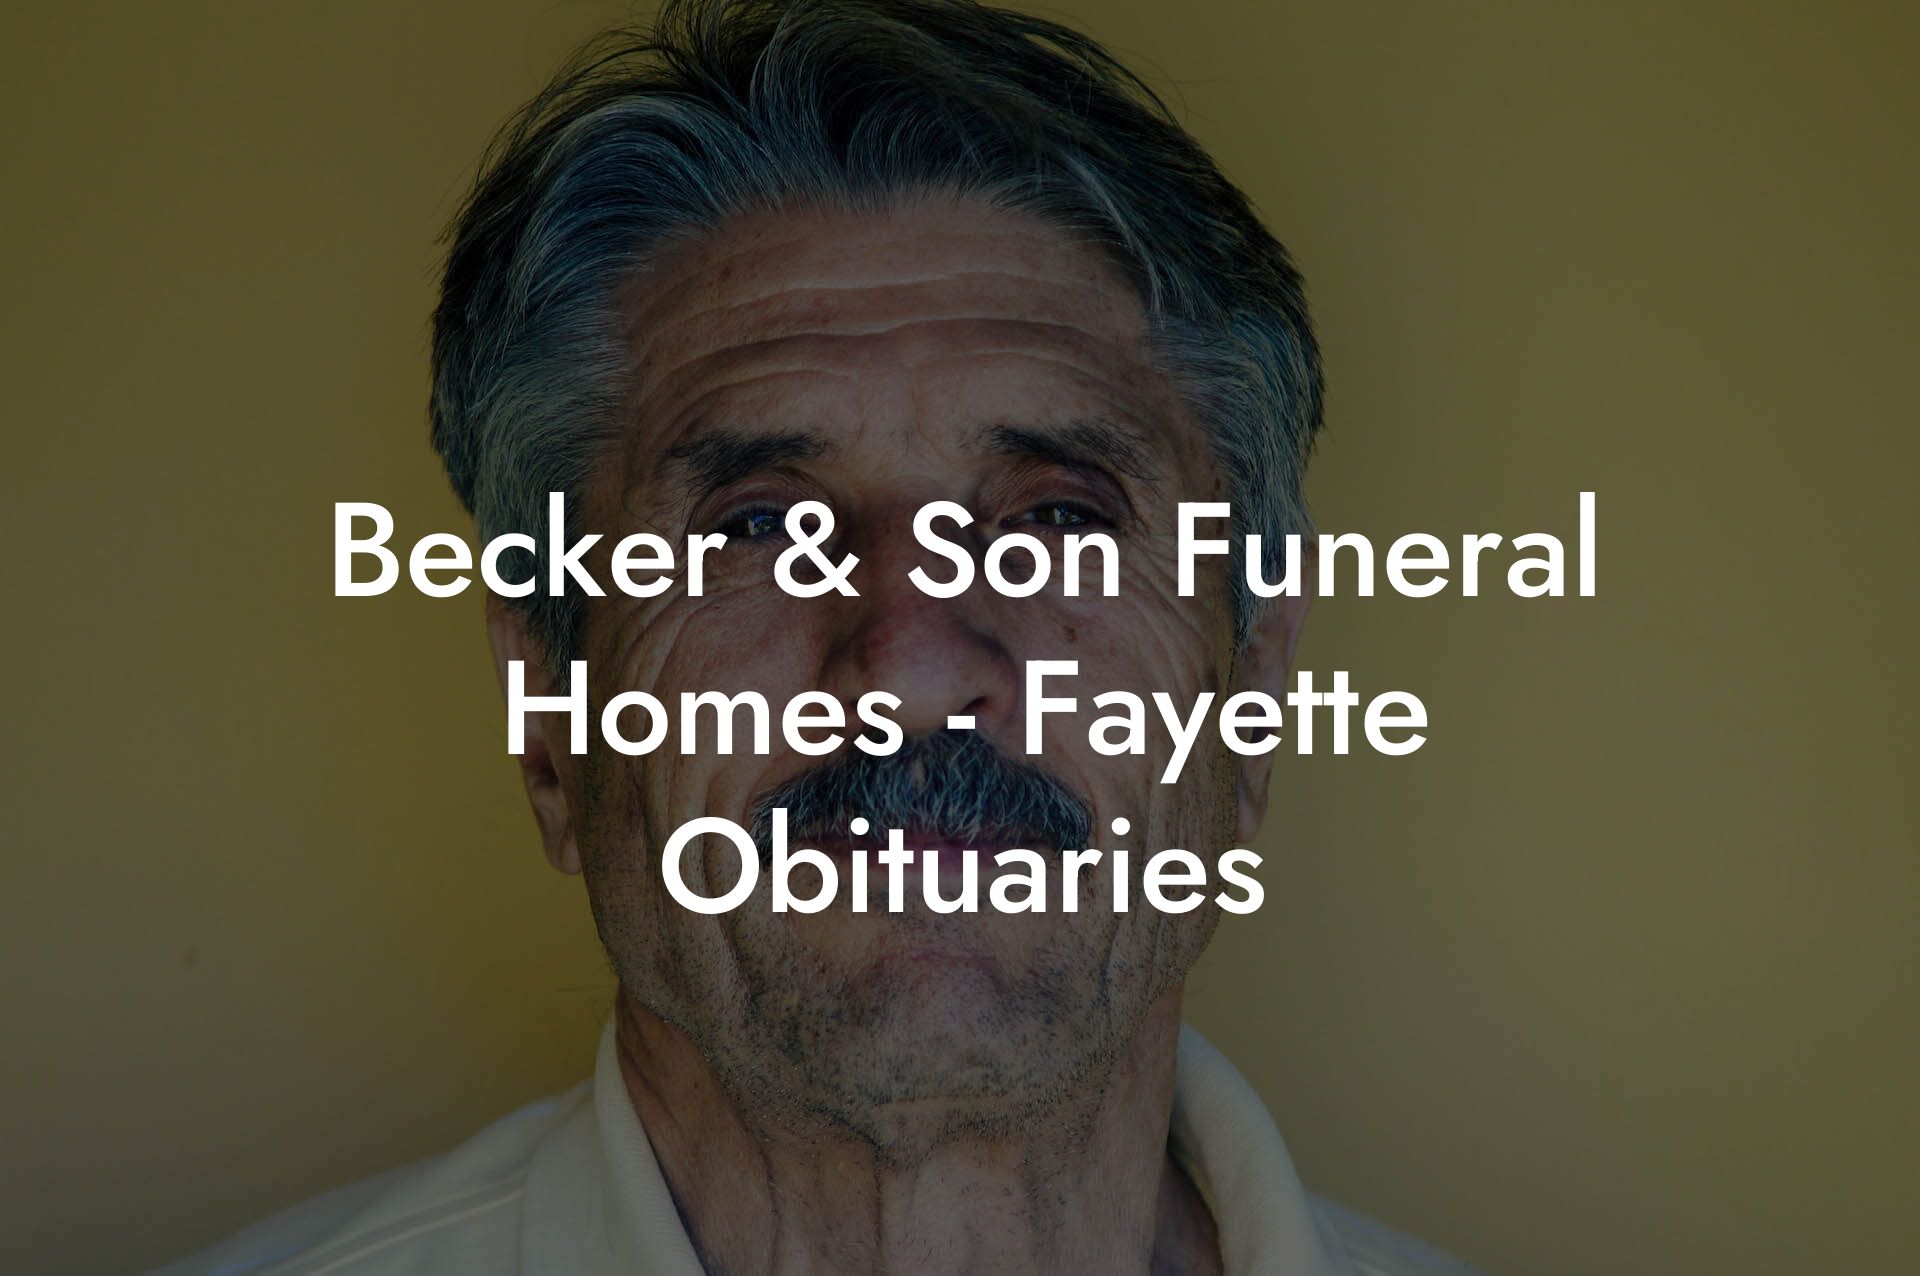 Becker & Son Funeral Homes - Fayette Obituaries